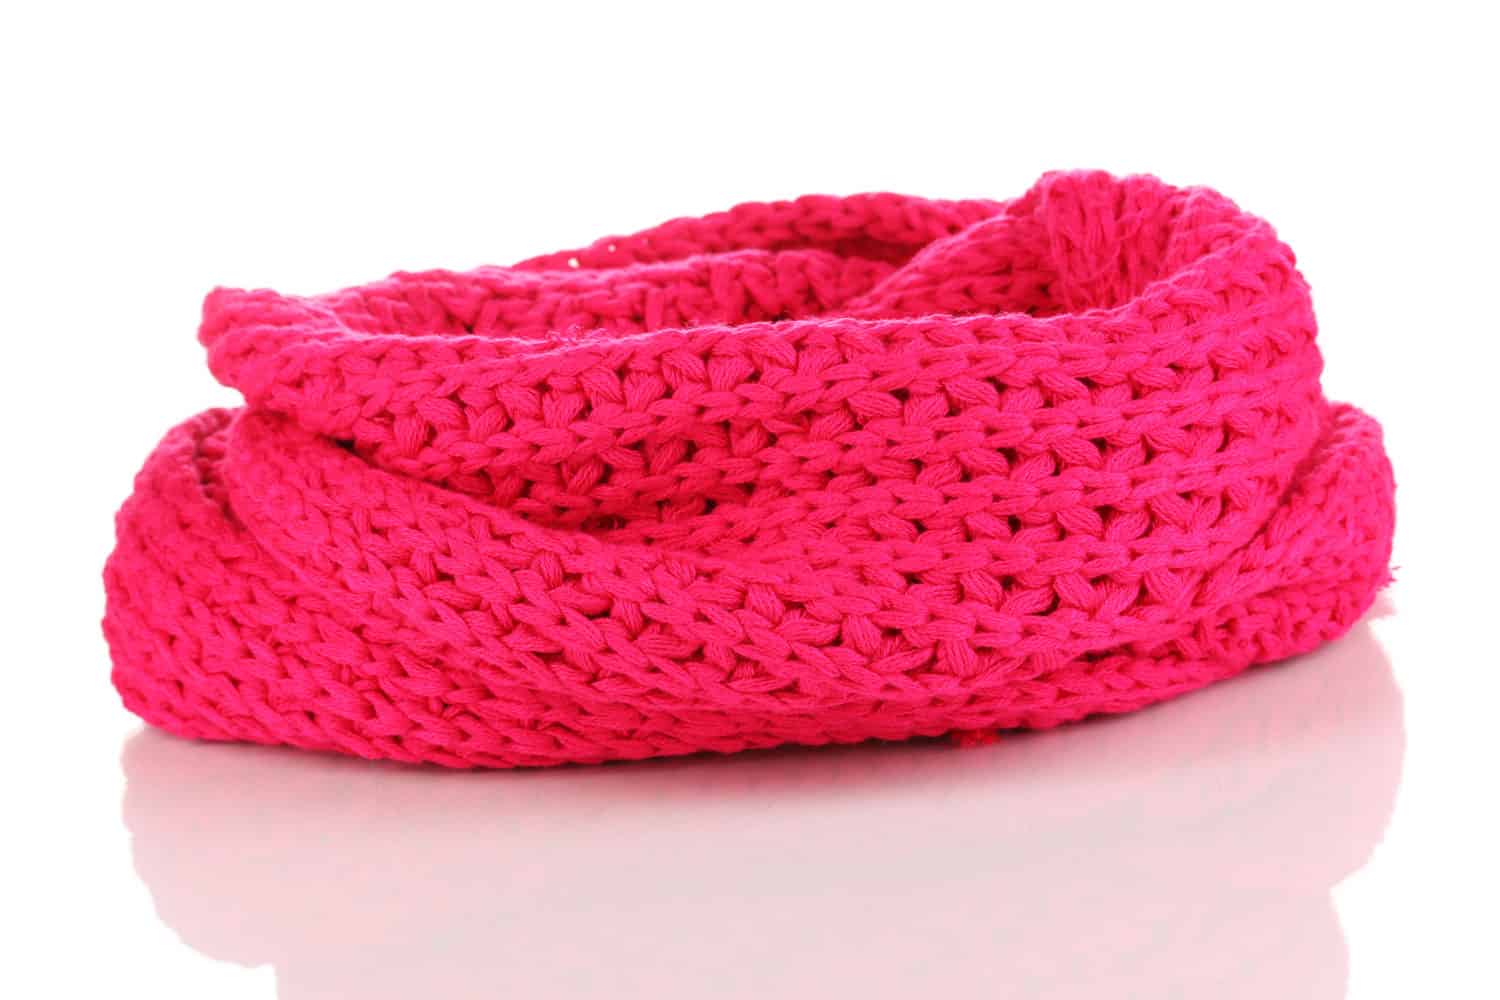 A gorgeously stitched light pink scarf on a white background